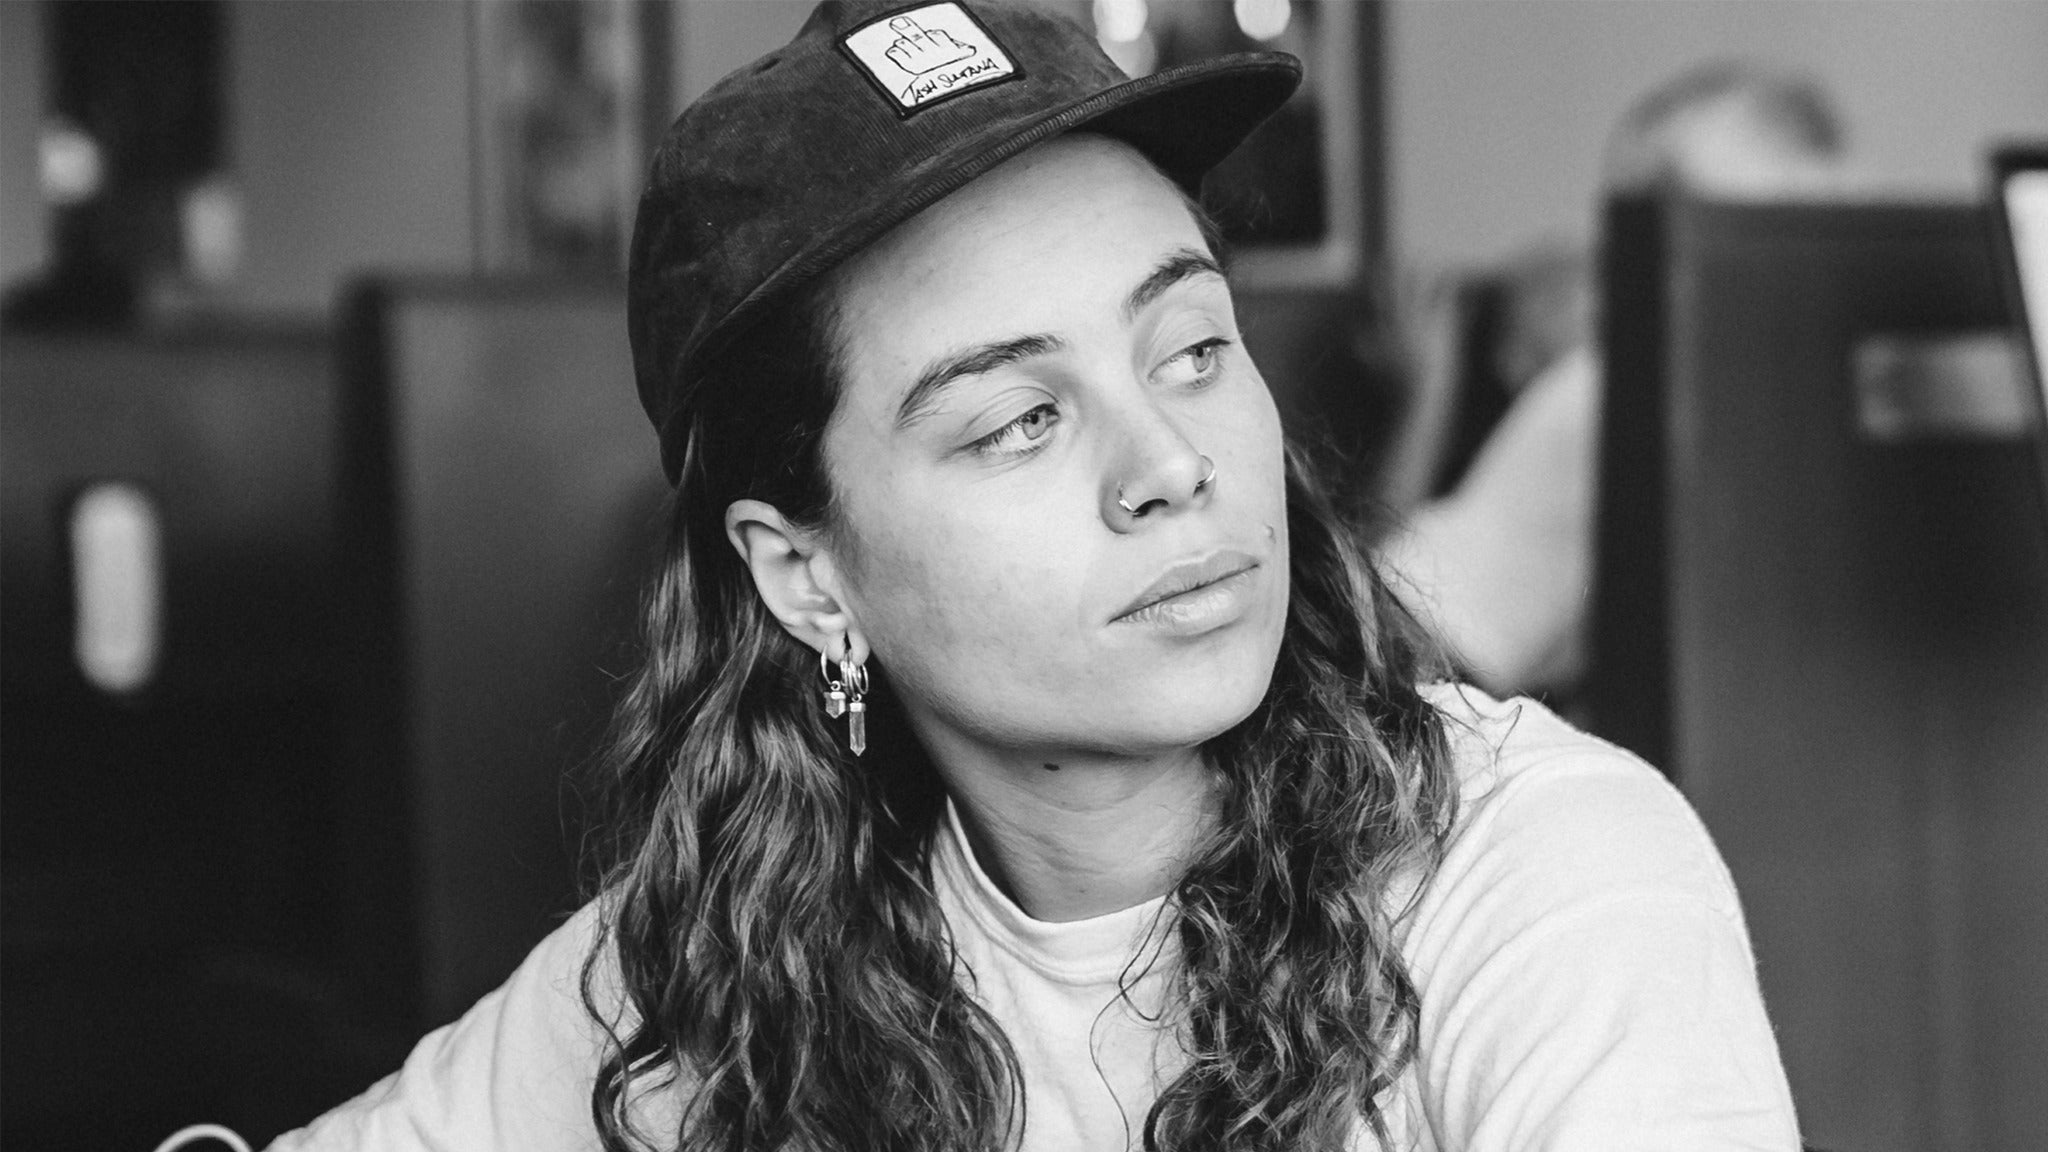 EVENT MOVED TO JACOB'S PAVILION: Tash Sultana in Cleveland promo photo for Live Nation Mobile App presale offer code